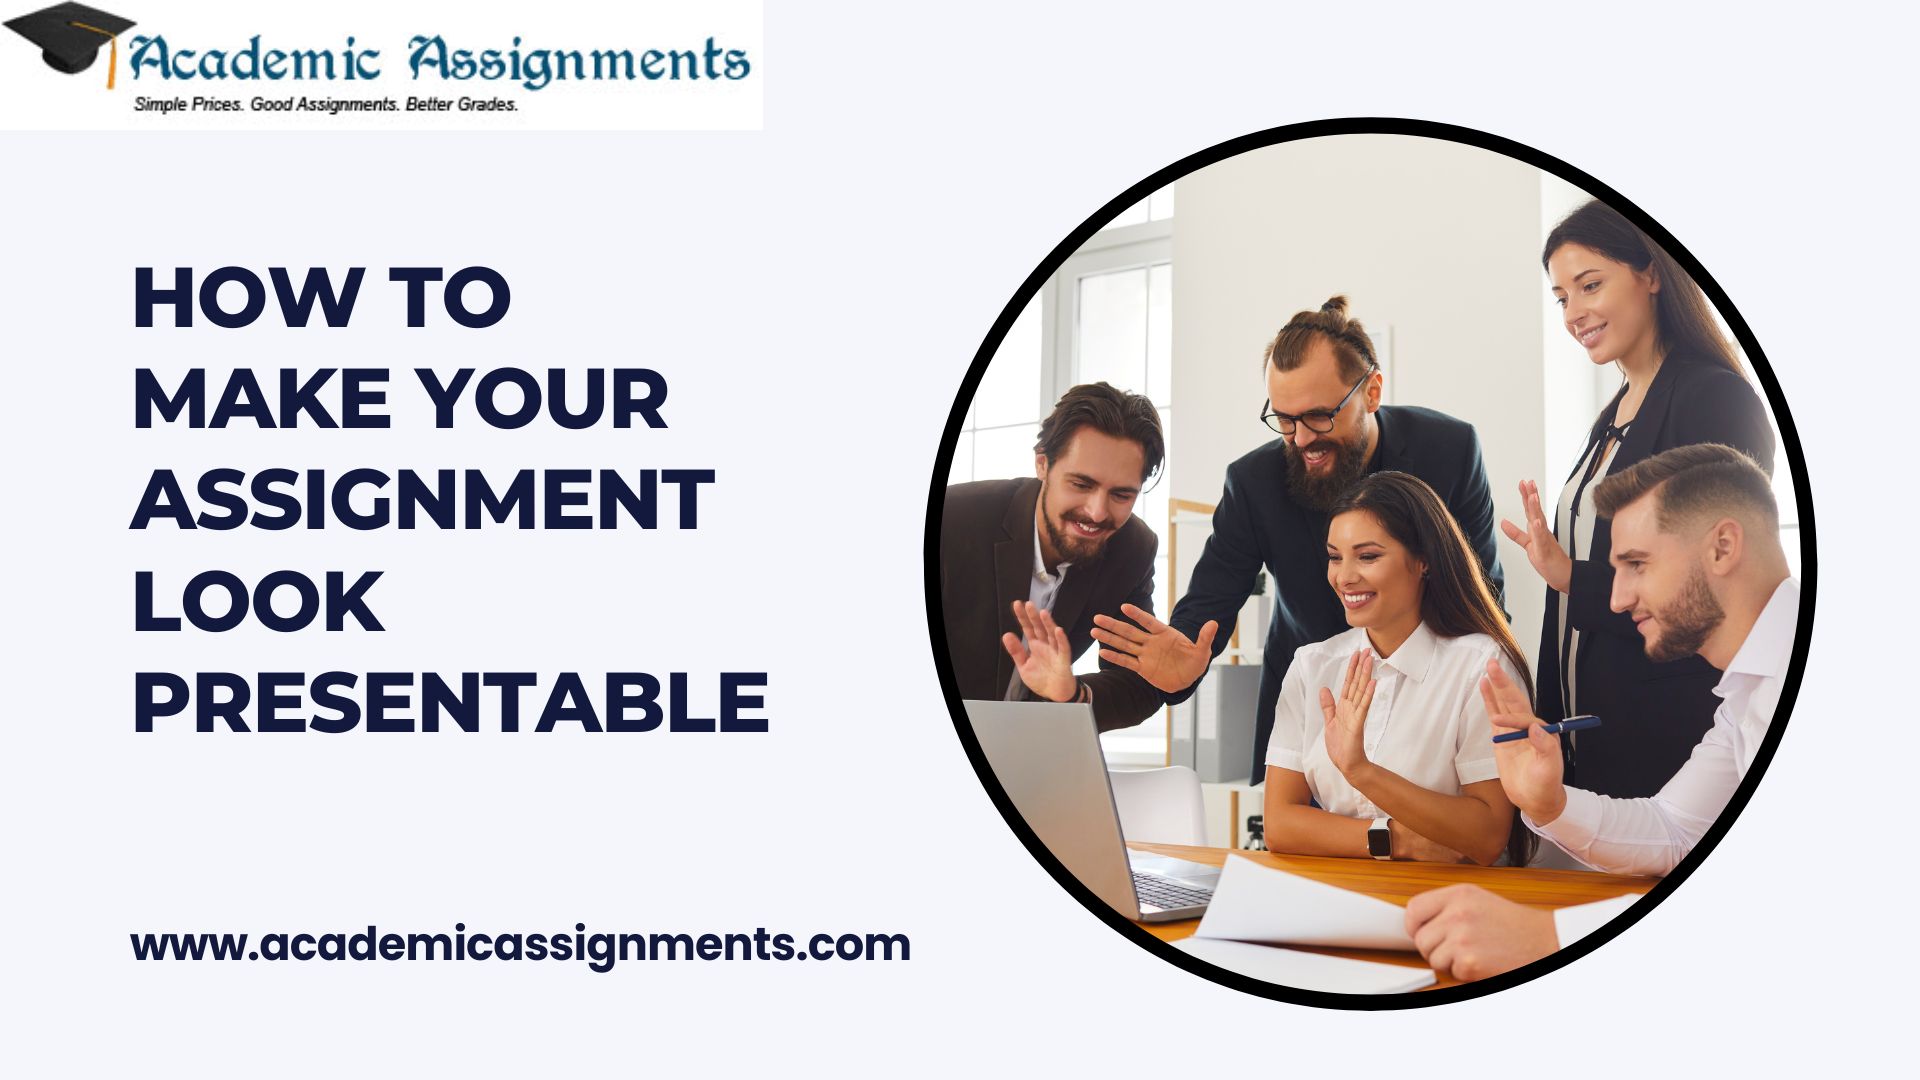 HOW TO MAKE YOUR ASSIGNMENT LOOK PRESENTABLE